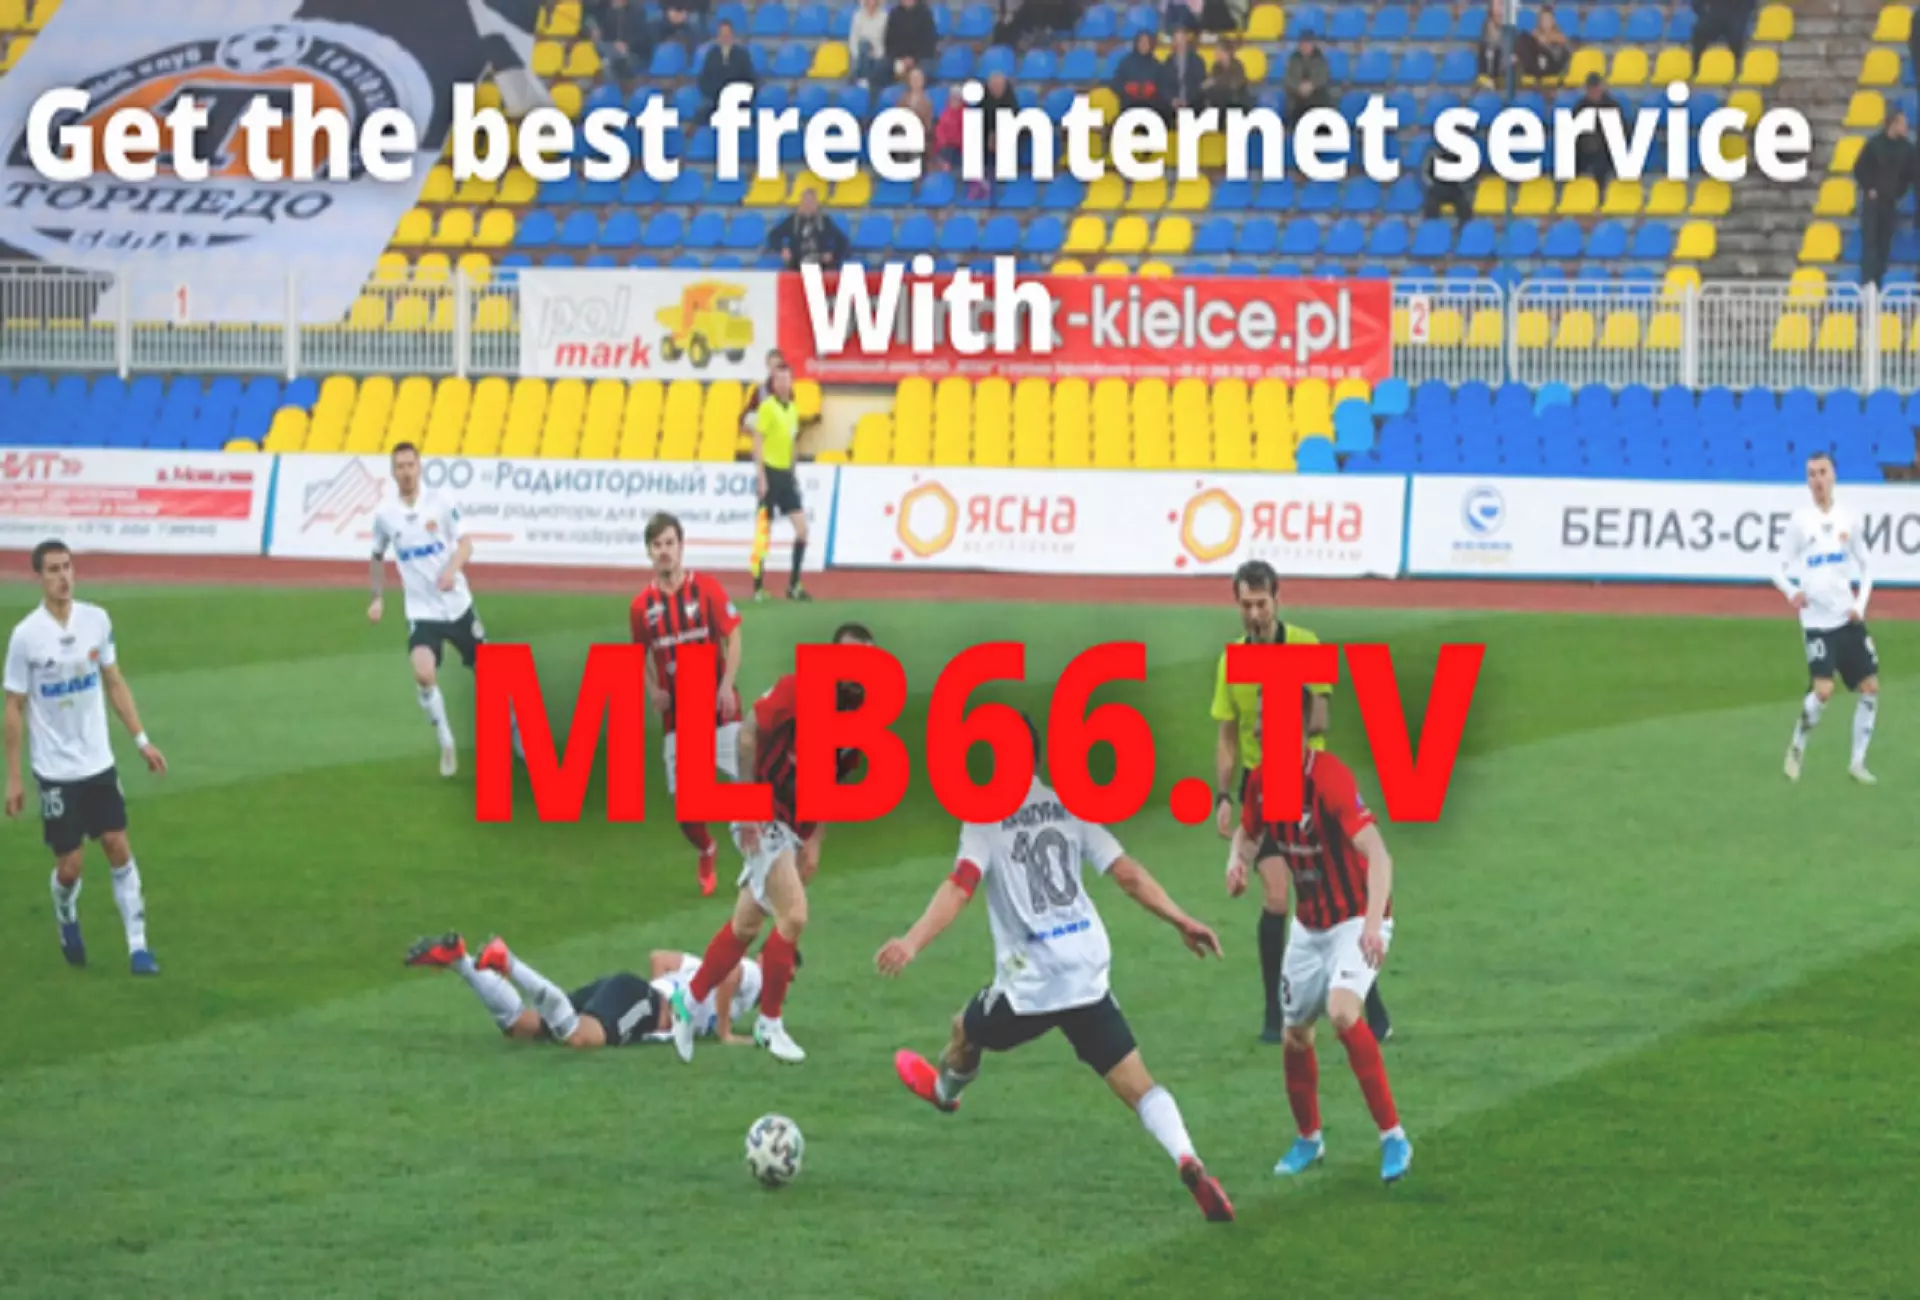 MLB66.TV: The Best Free Internet TV Service In The World